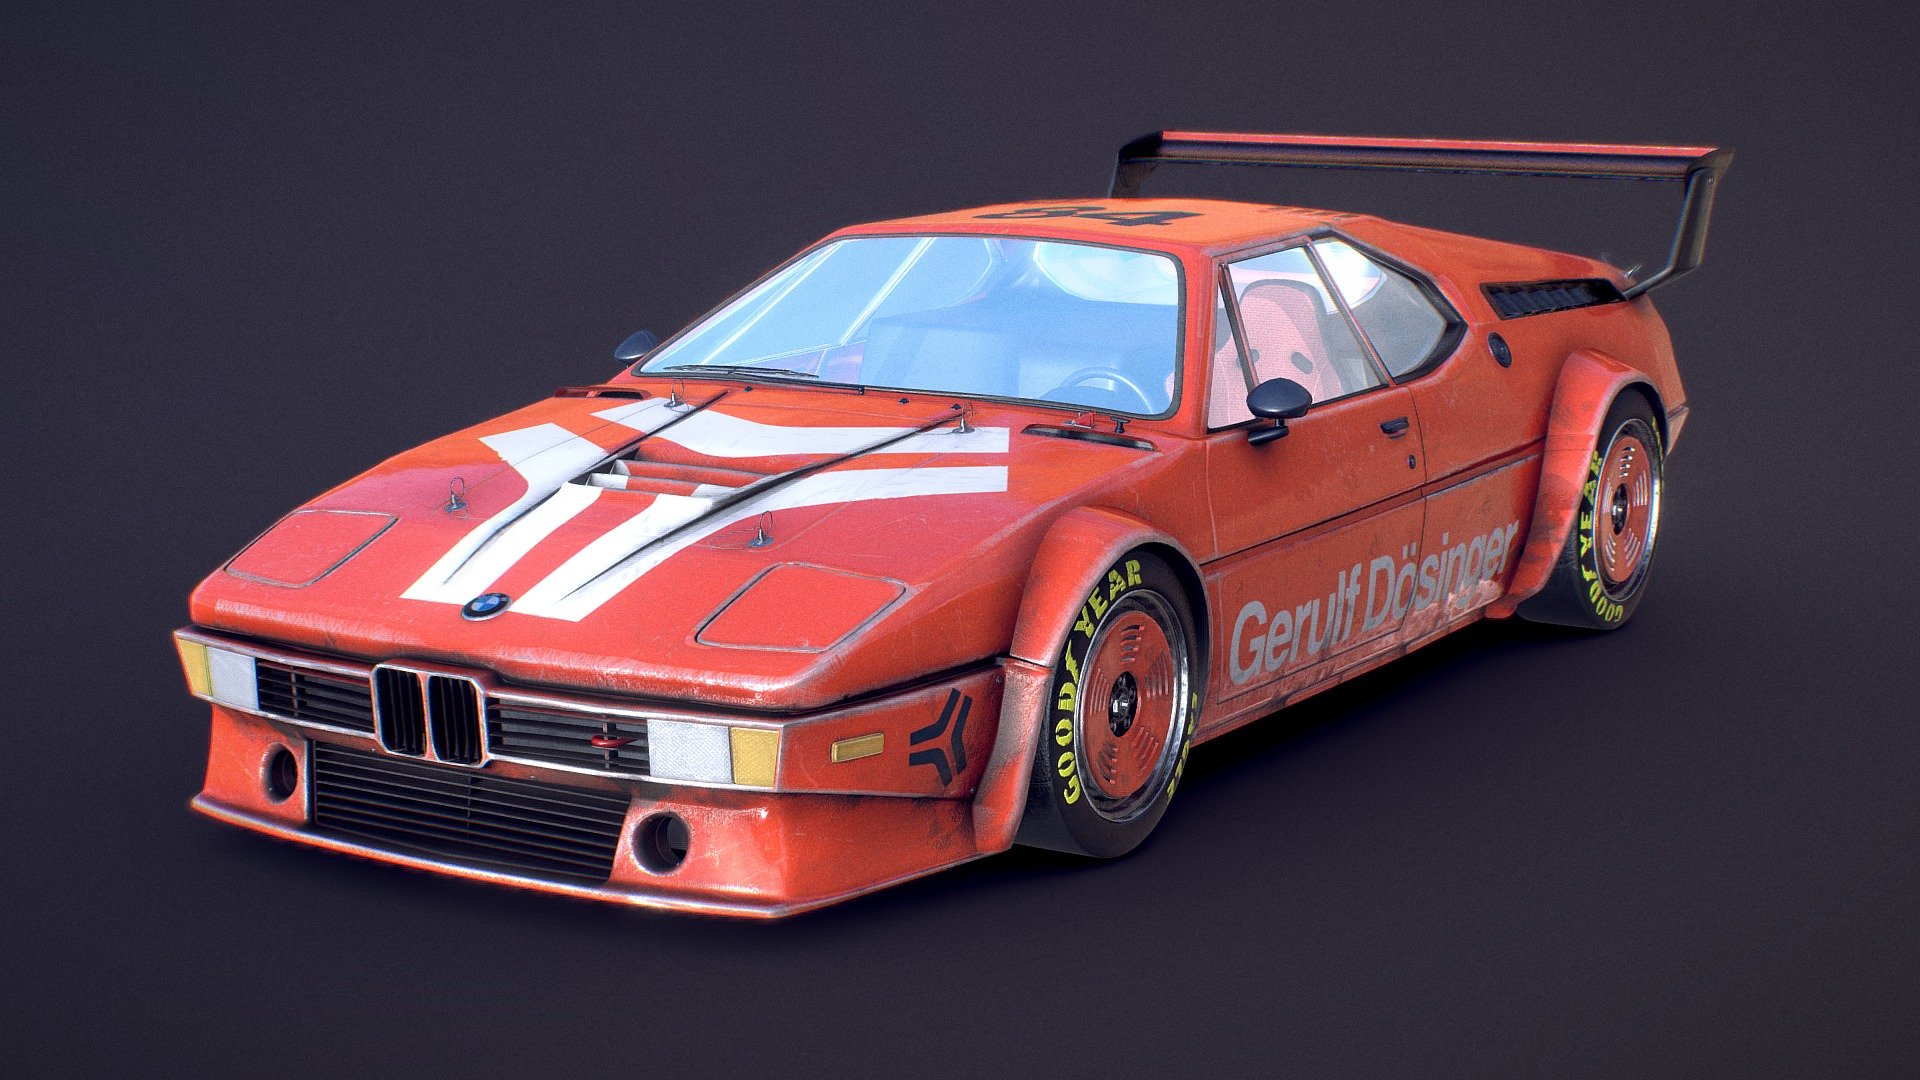 The legendary BMW M1 ProCar. Modeled in Blender, Texturen in Substance Painter. Med-/Hi-Poly.

This model is fully UV unwrapped, features PBR texture-maps and the paid download comes with a neutral livery, so you have a plain car without any decals.

Make sure to download the &ldquo;Additional File